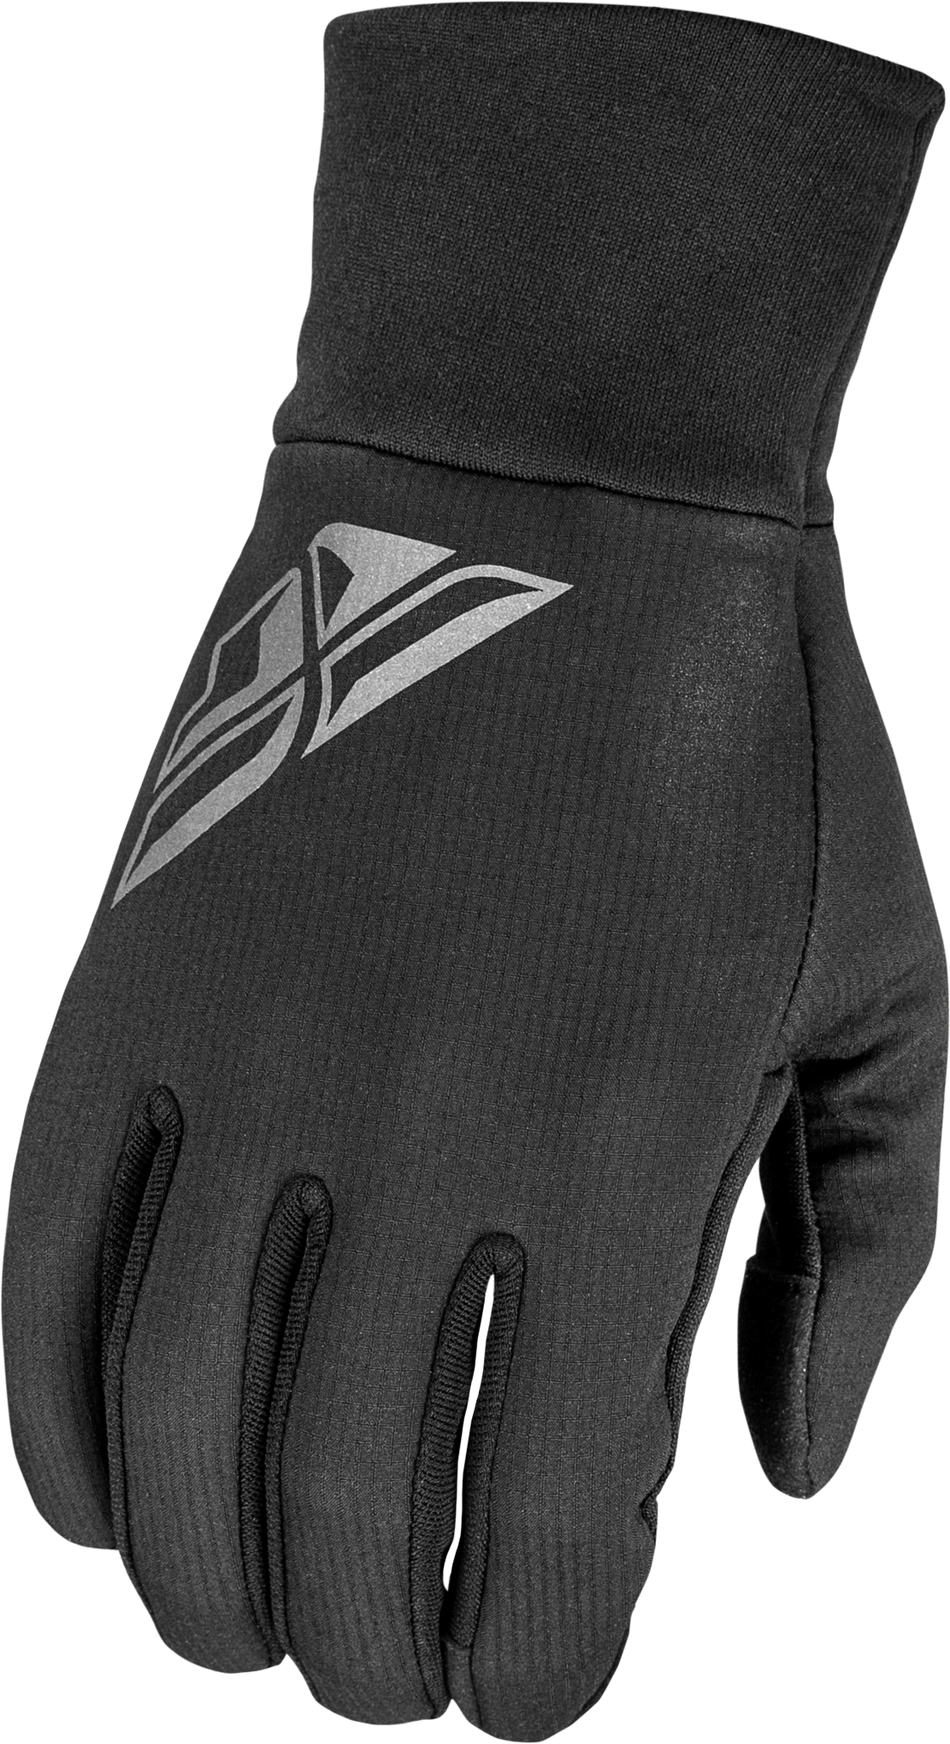 FLY RACING Glove Liners Black Lg 363-3960L